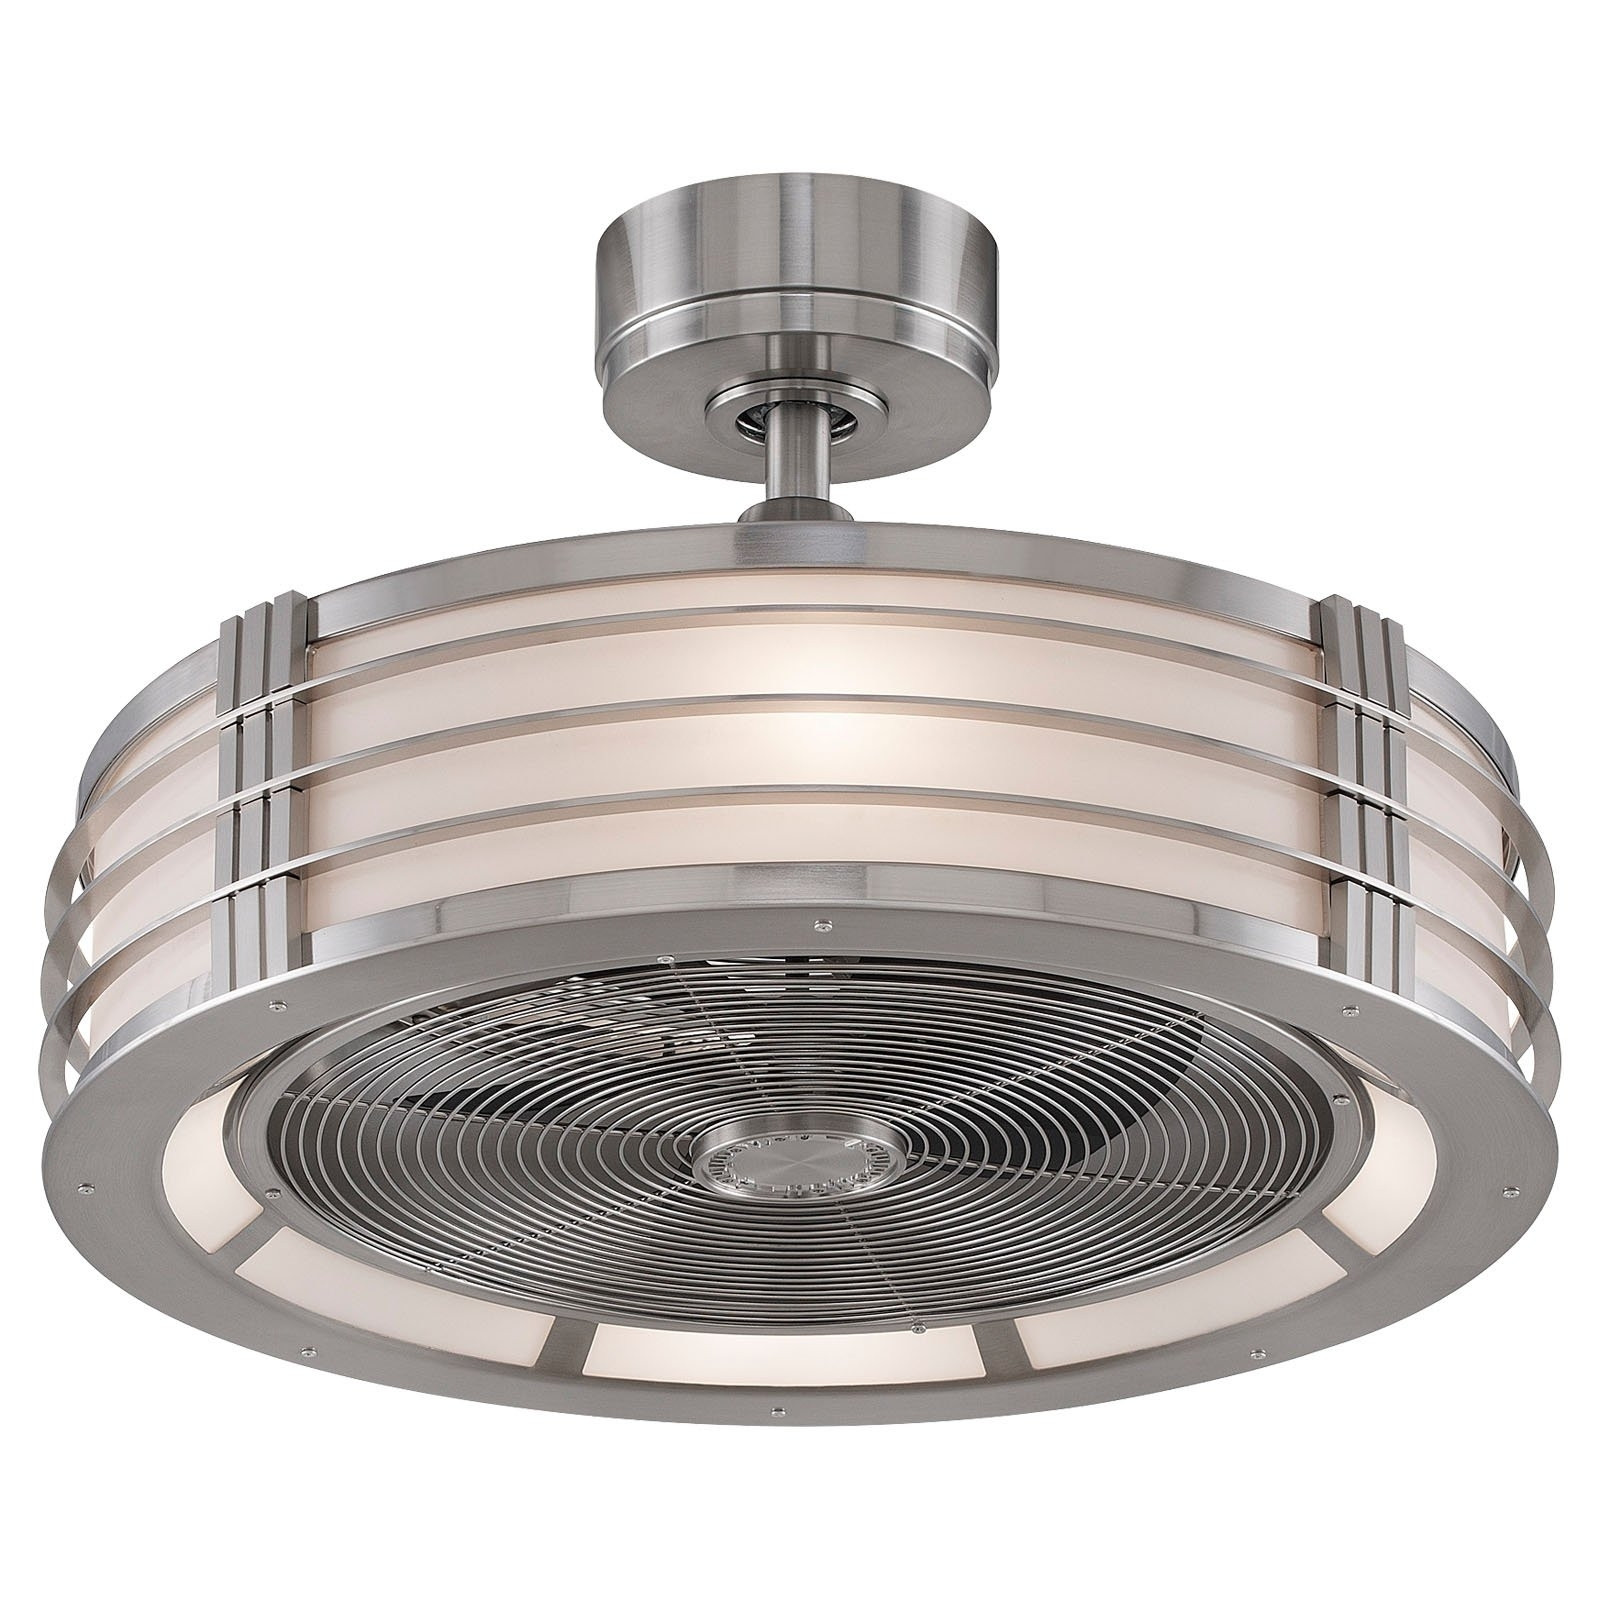 Small Ceiling Fan For Bathroom
 10 adventiges of Small bathroom ceiling fans